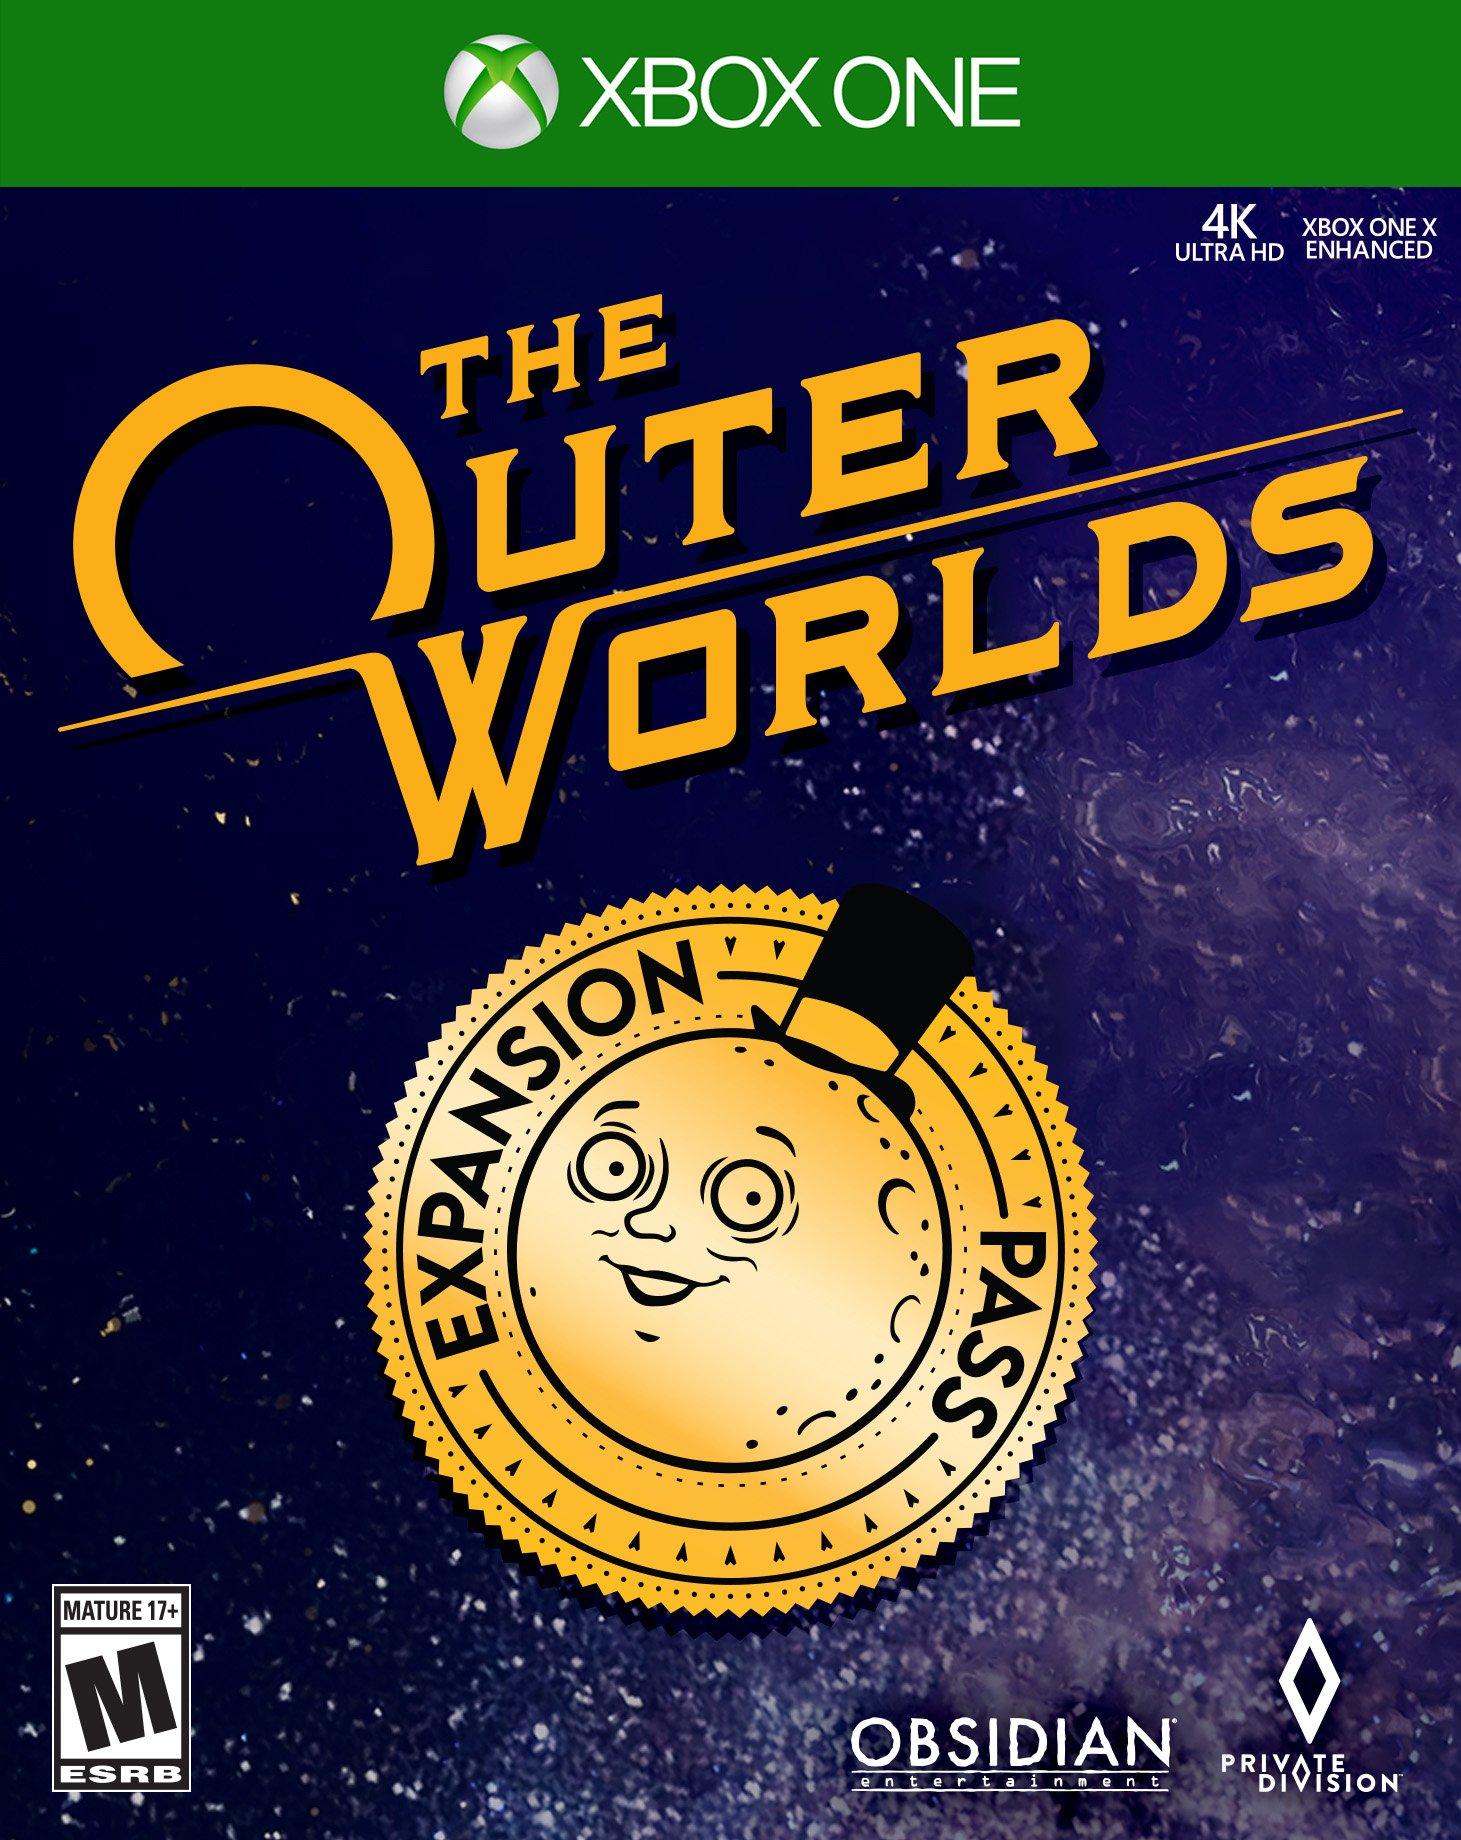 The Outer Worlds: Expansion Pass, Take-Two 2K, PlayStation 4 [Digital  Download] 